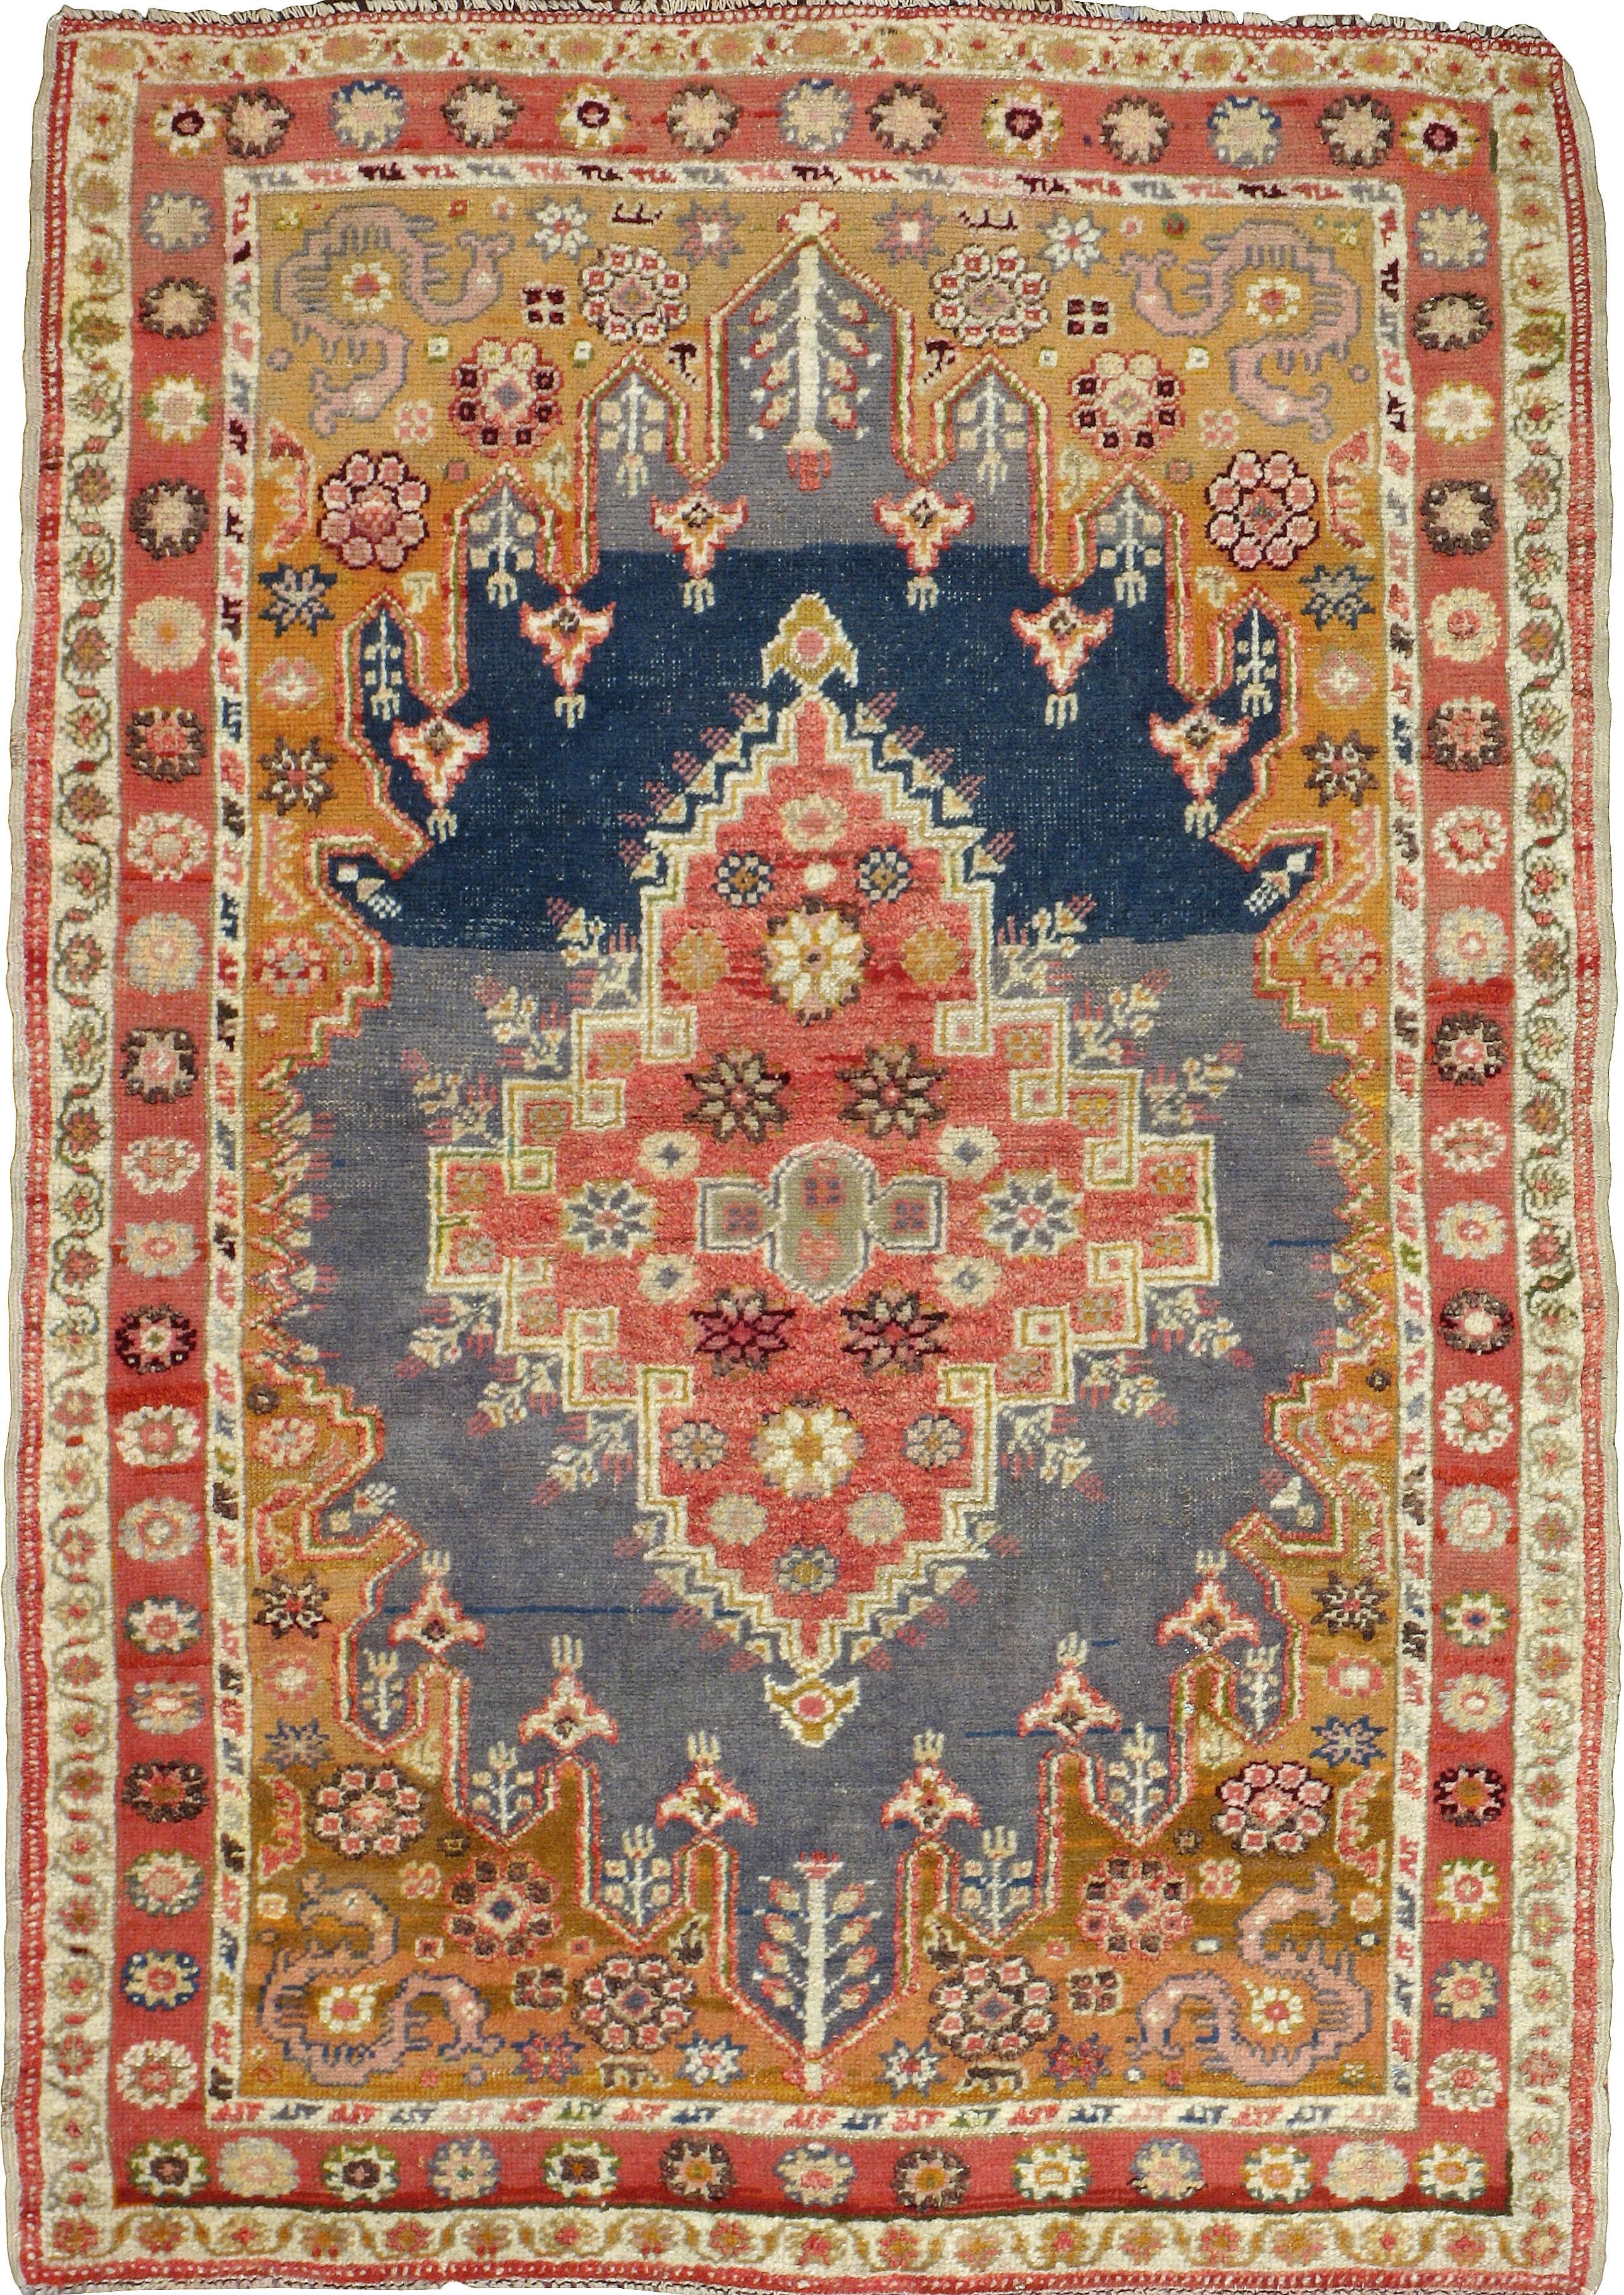 An antique Turkish Oushak carpet from the first quarter of the 20th century.